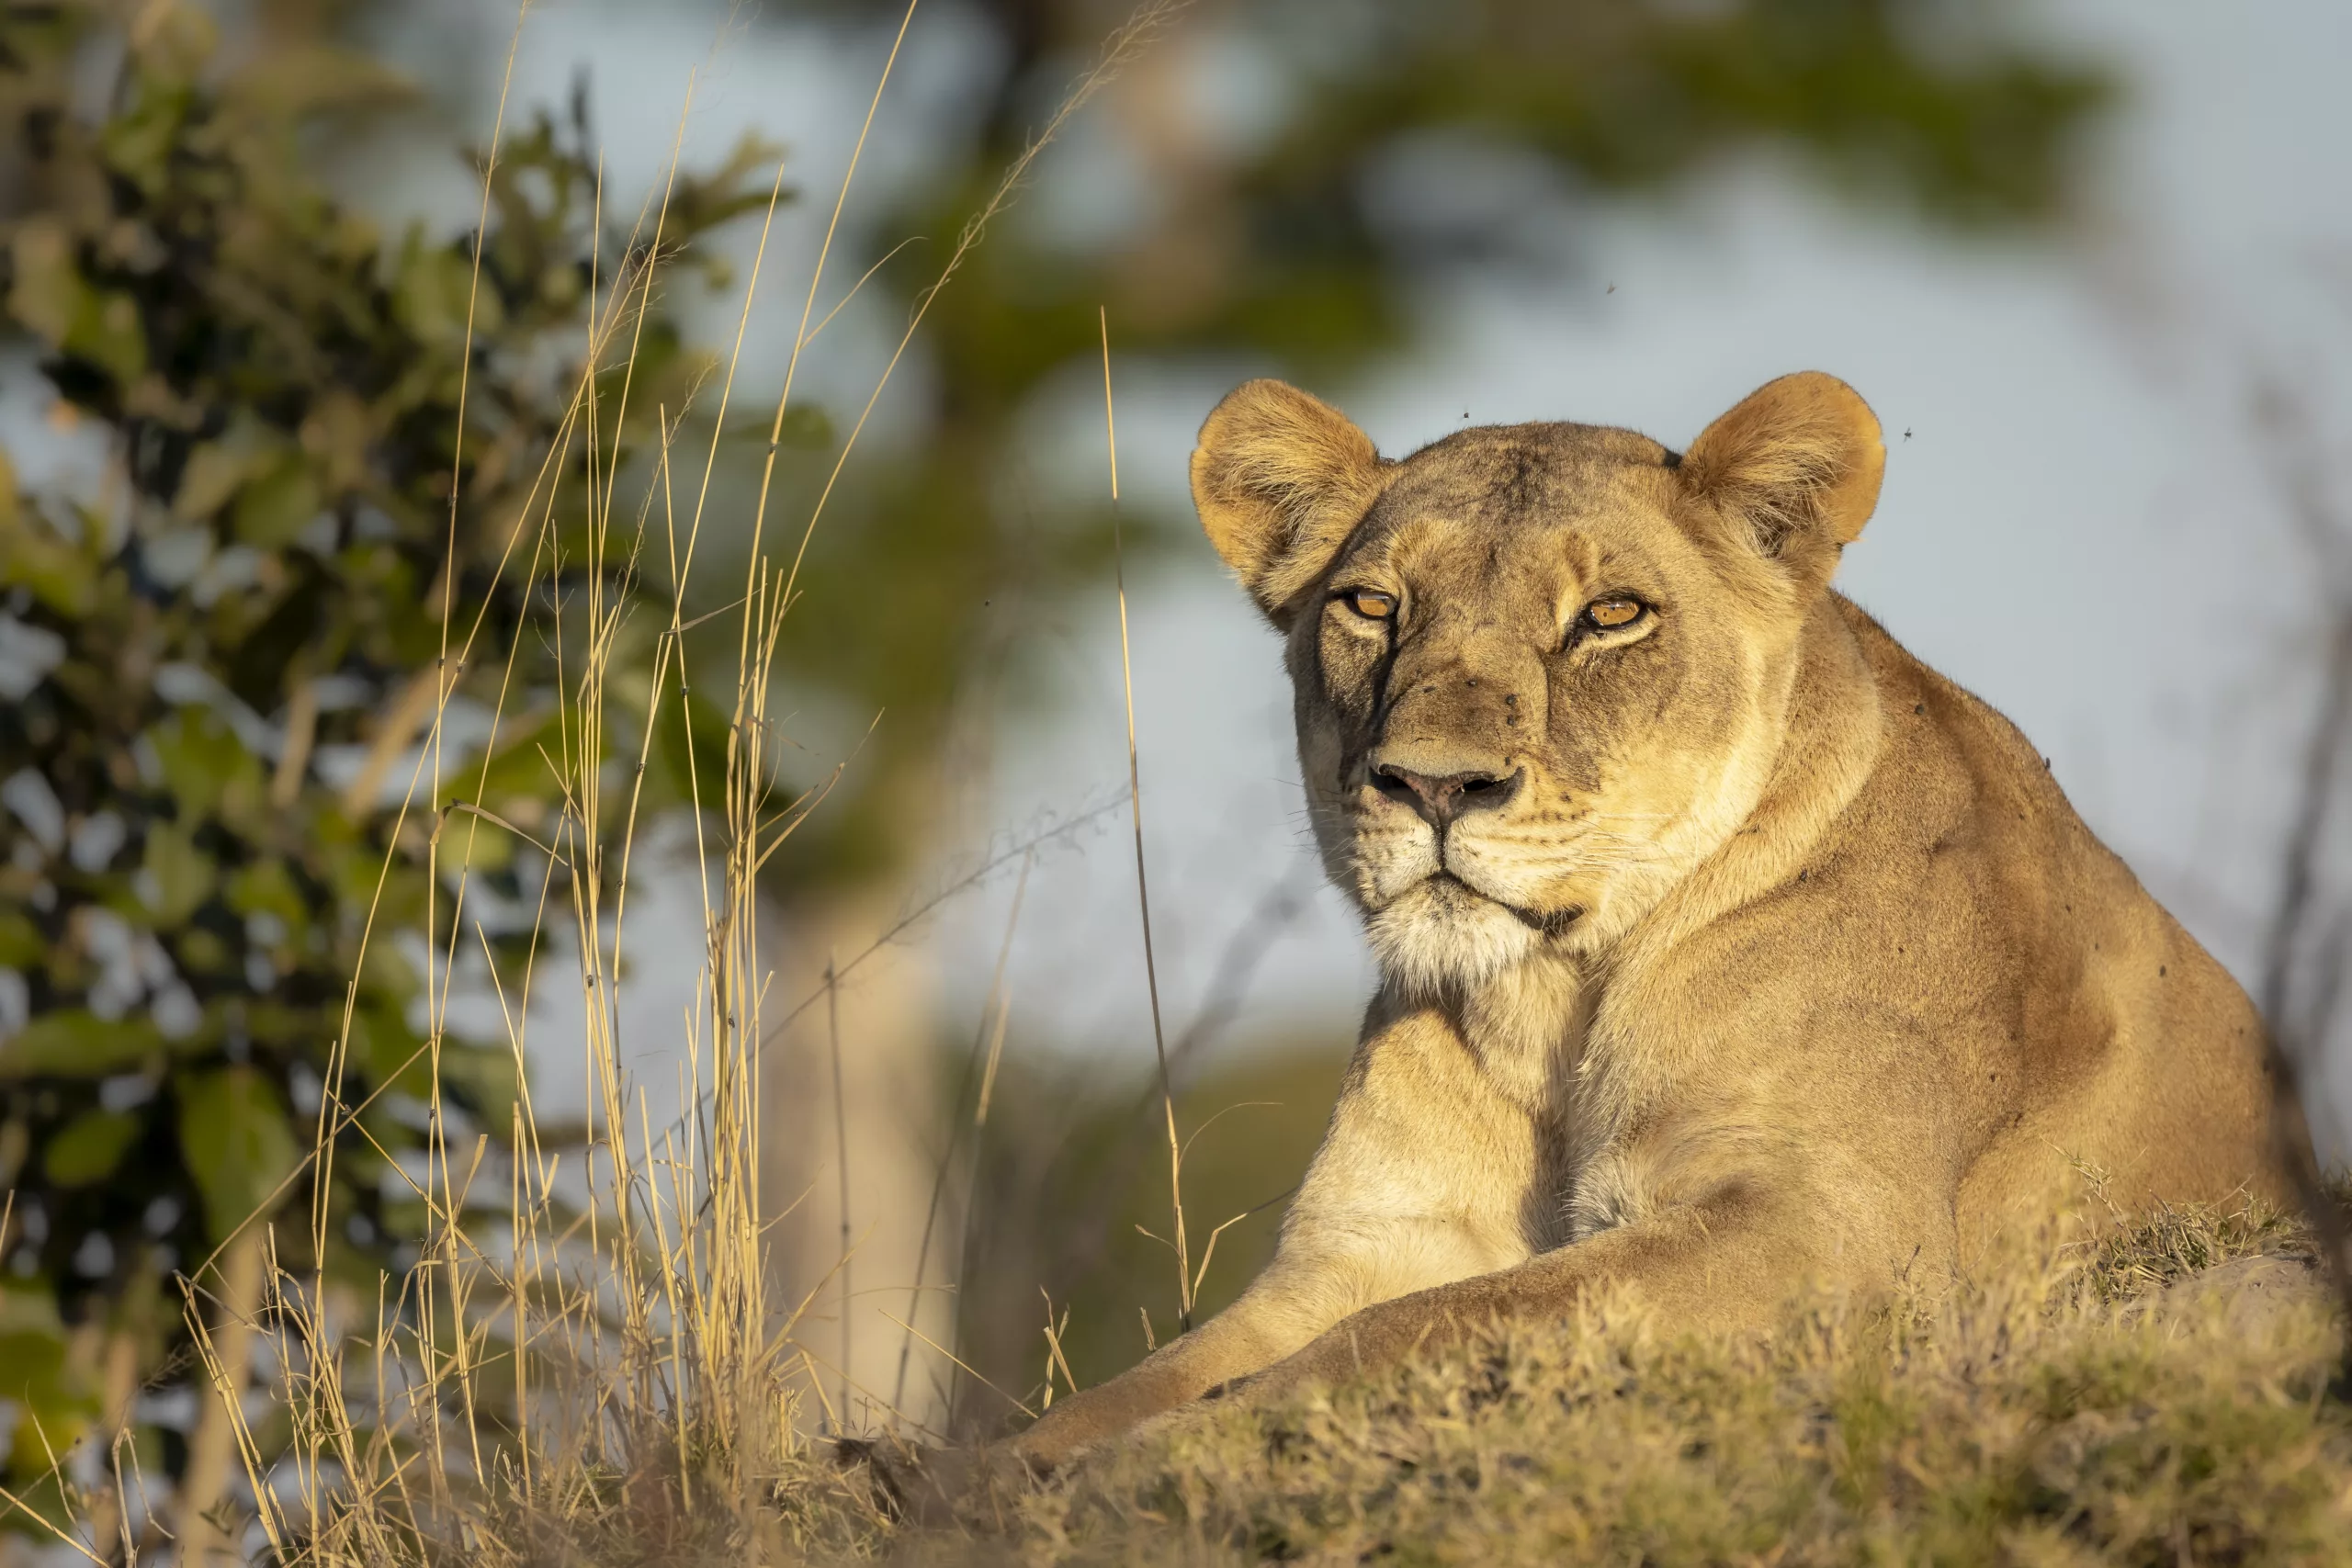 Lions photography tips